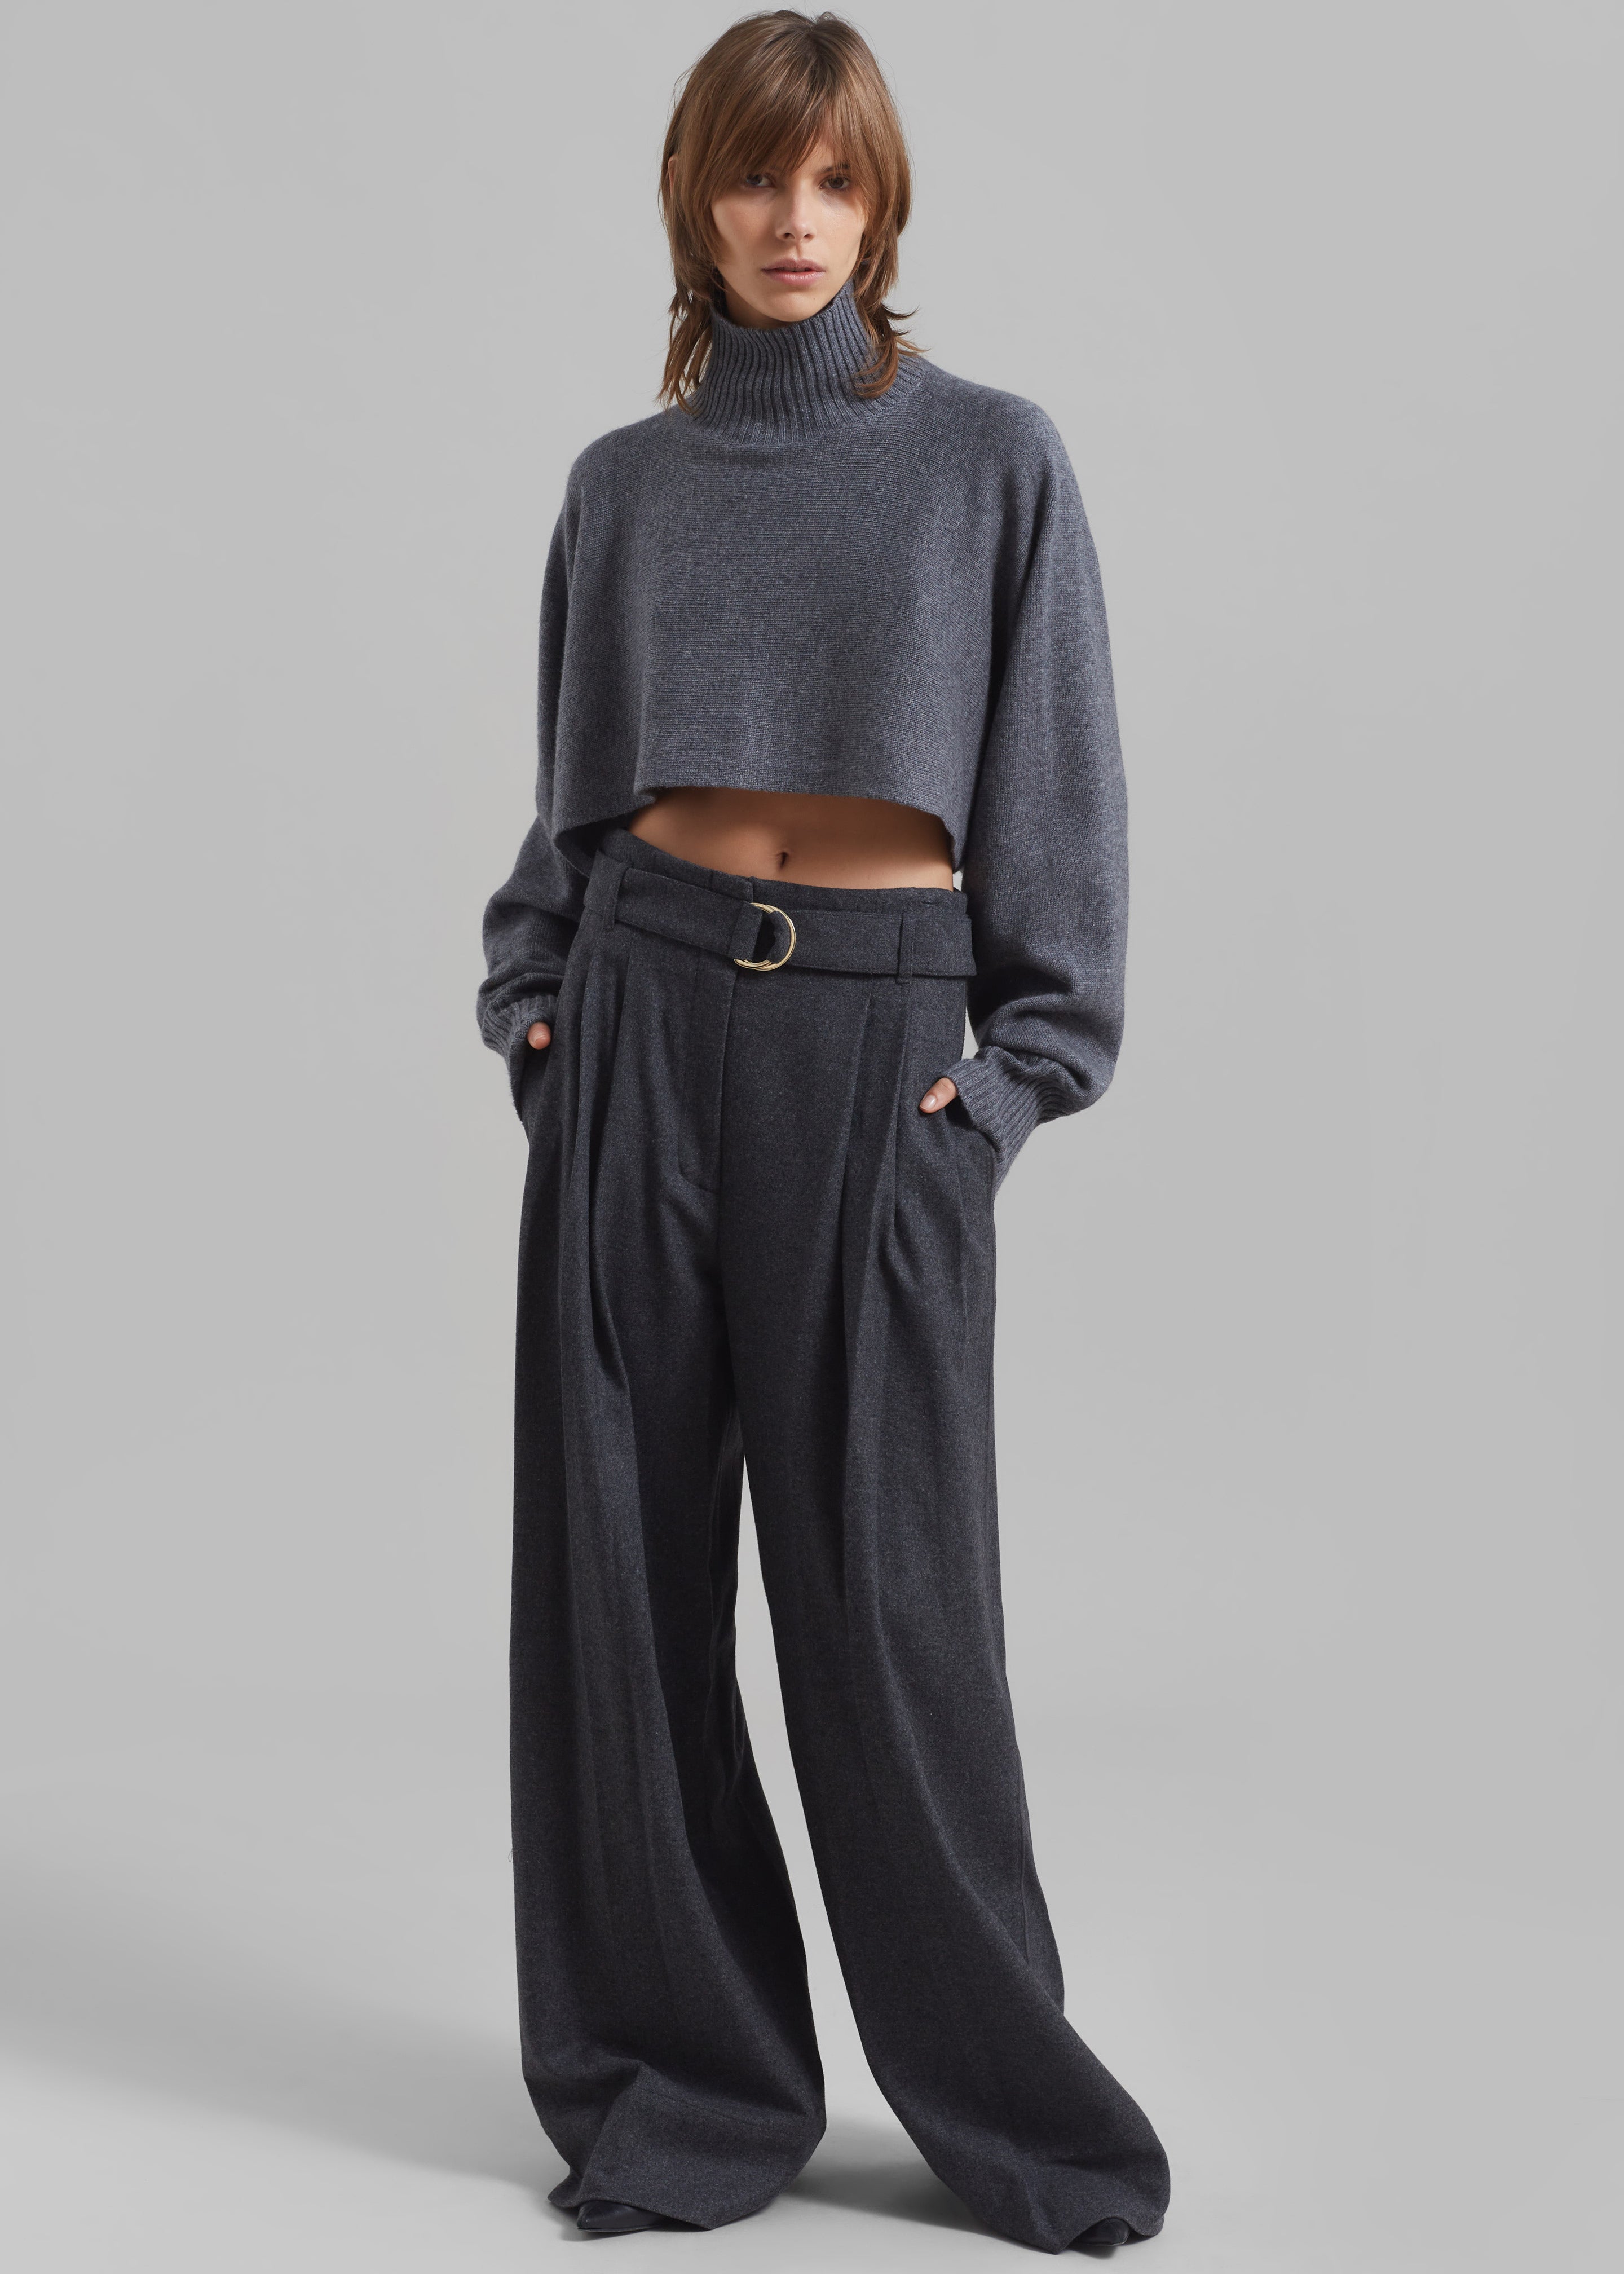 3.1 Phillip Lim Flannel Oversized Pleated Belted Pants - Charcoal - 5